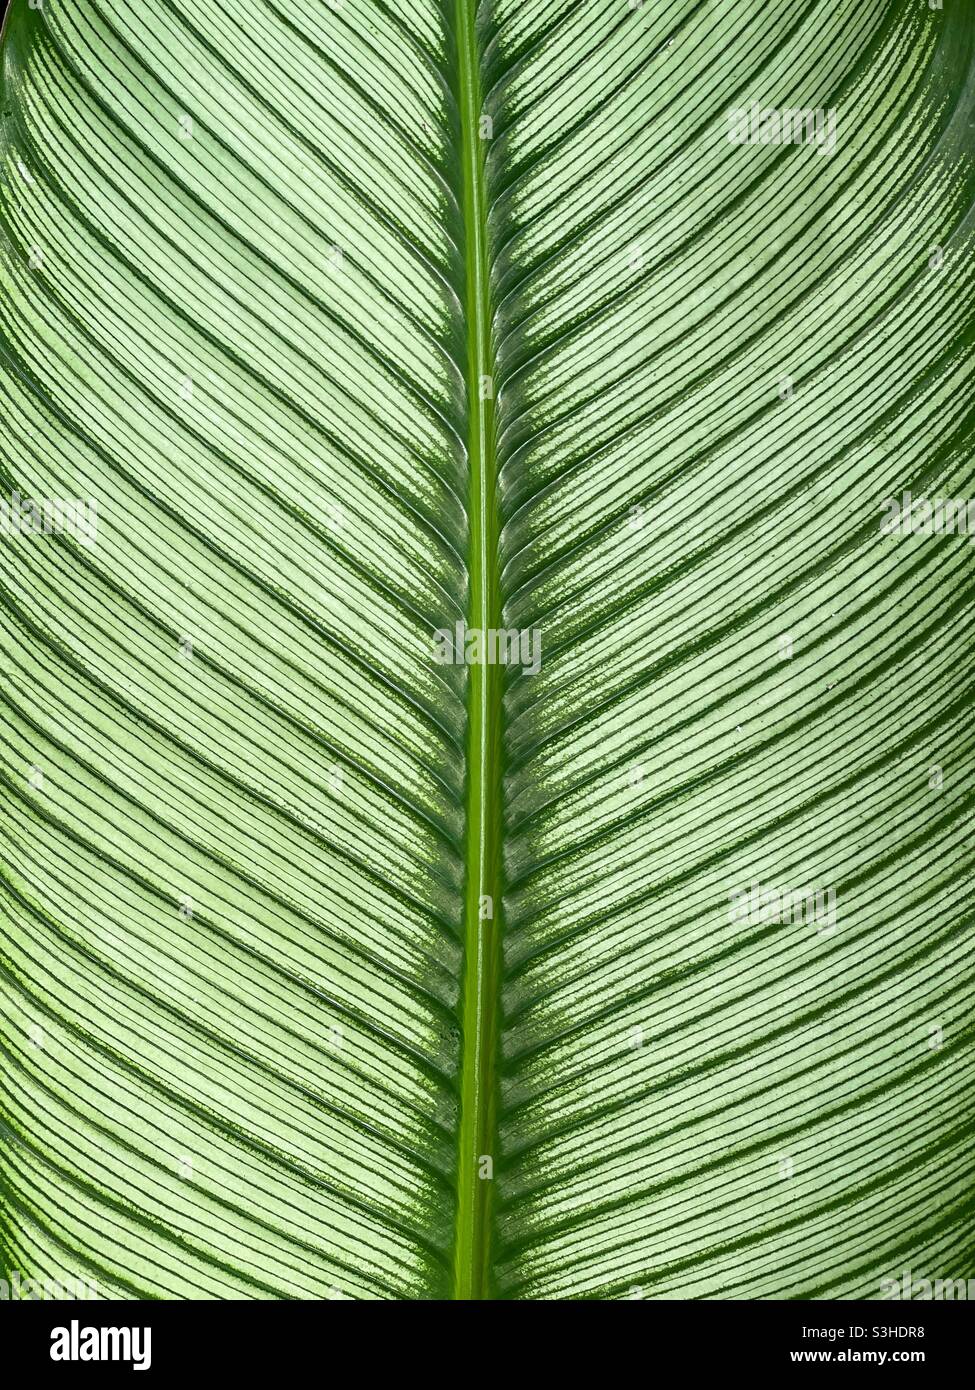 Closeup view of the veins on a large leaf Stock Photo